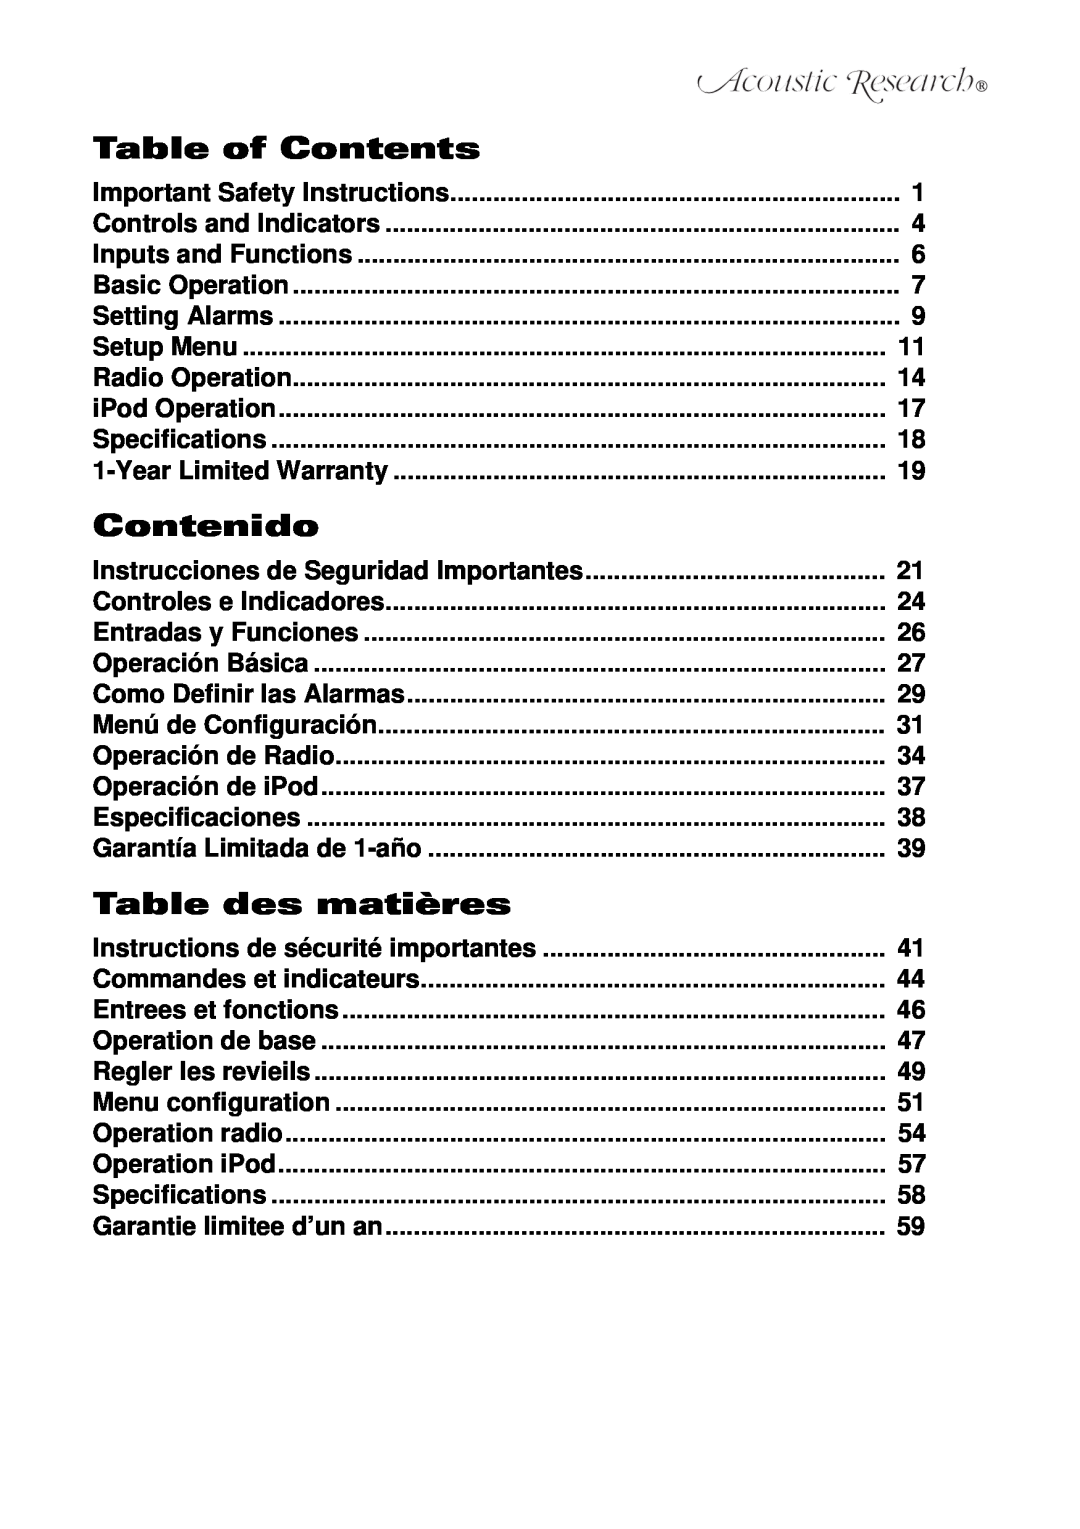 Acoustic Research ART1 owner manual Table of Contents, Contenido, Table des matières 